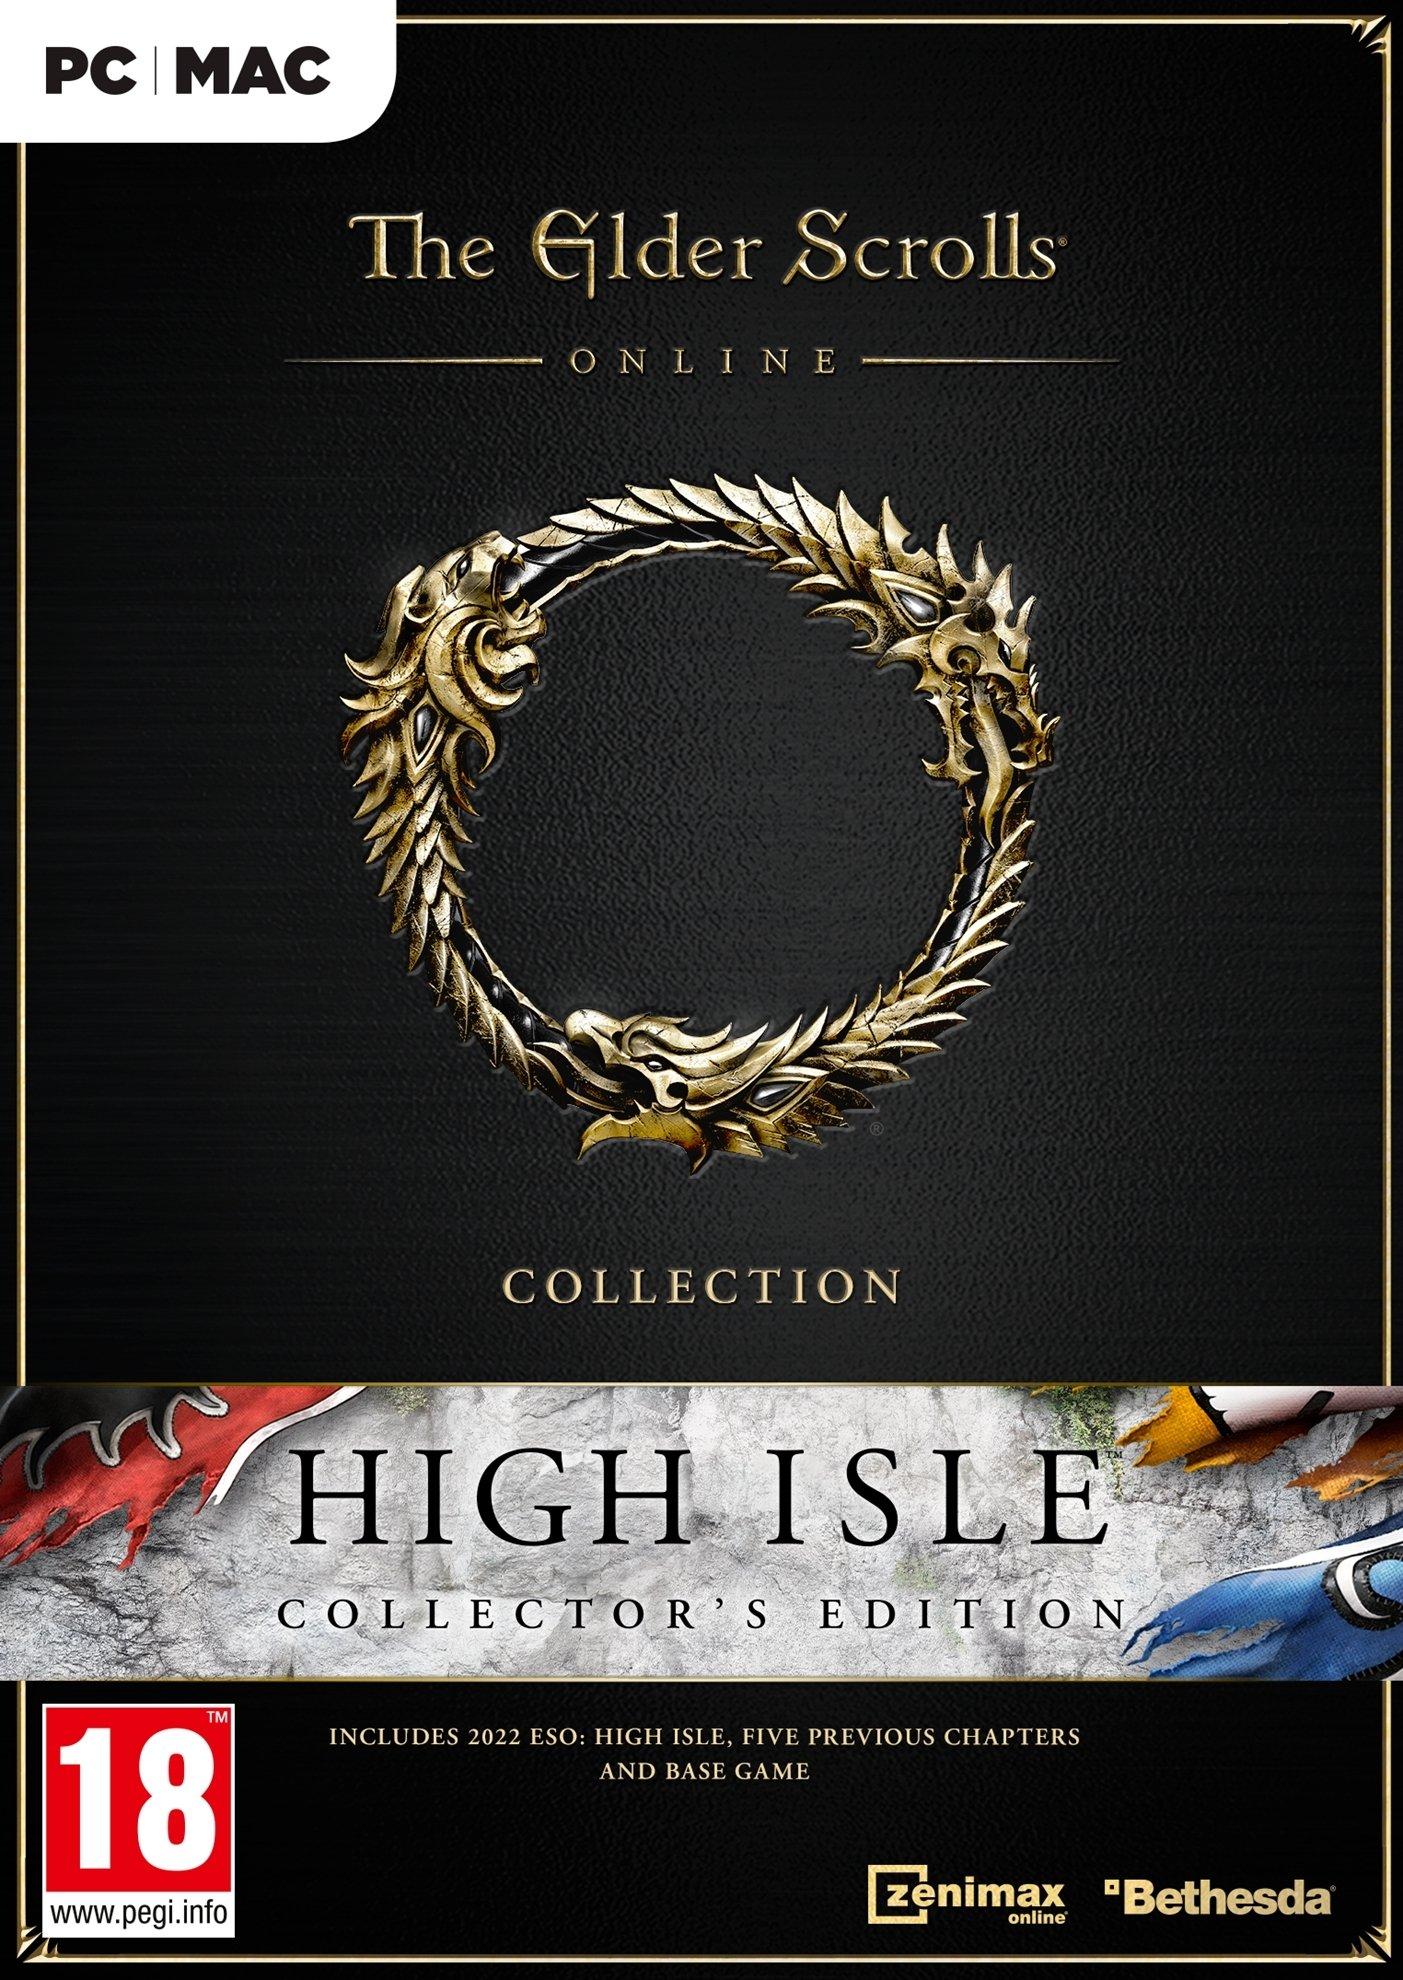 The Elder Scrolls® Online Collection:  High Isle™ Collector's Edition